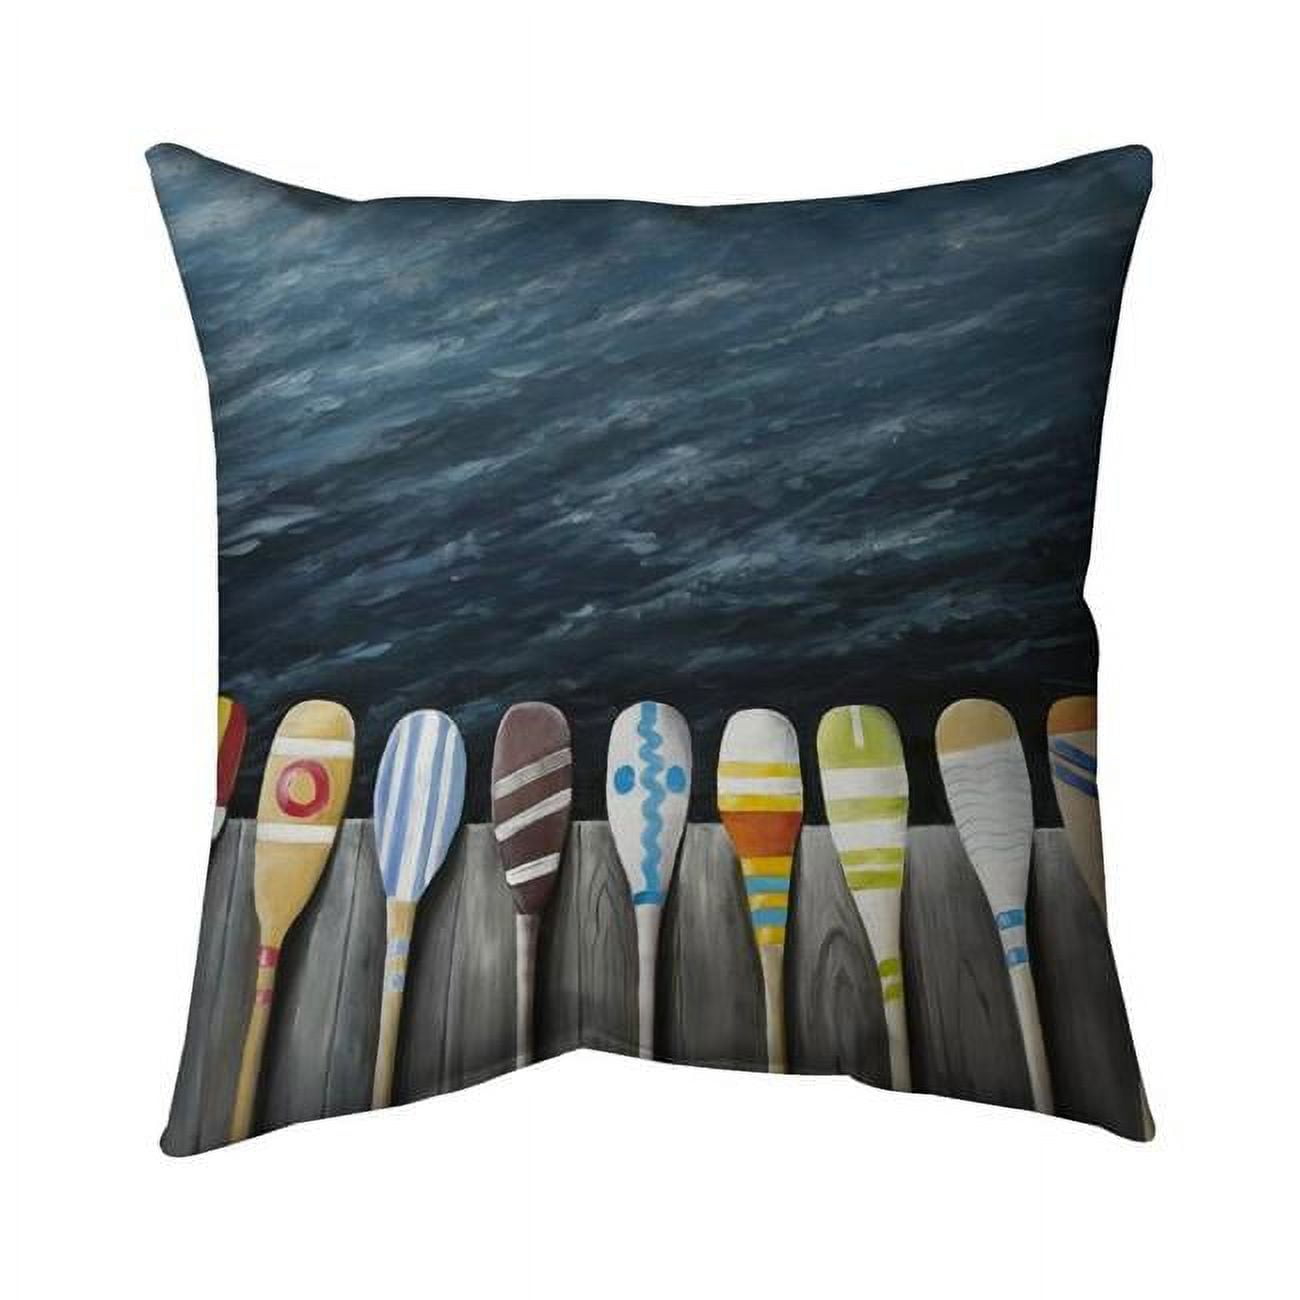 Fondo 16 x 16 in. Colorful Paddles on the Dock-Double Sided Print Outdoor Pillow Cover